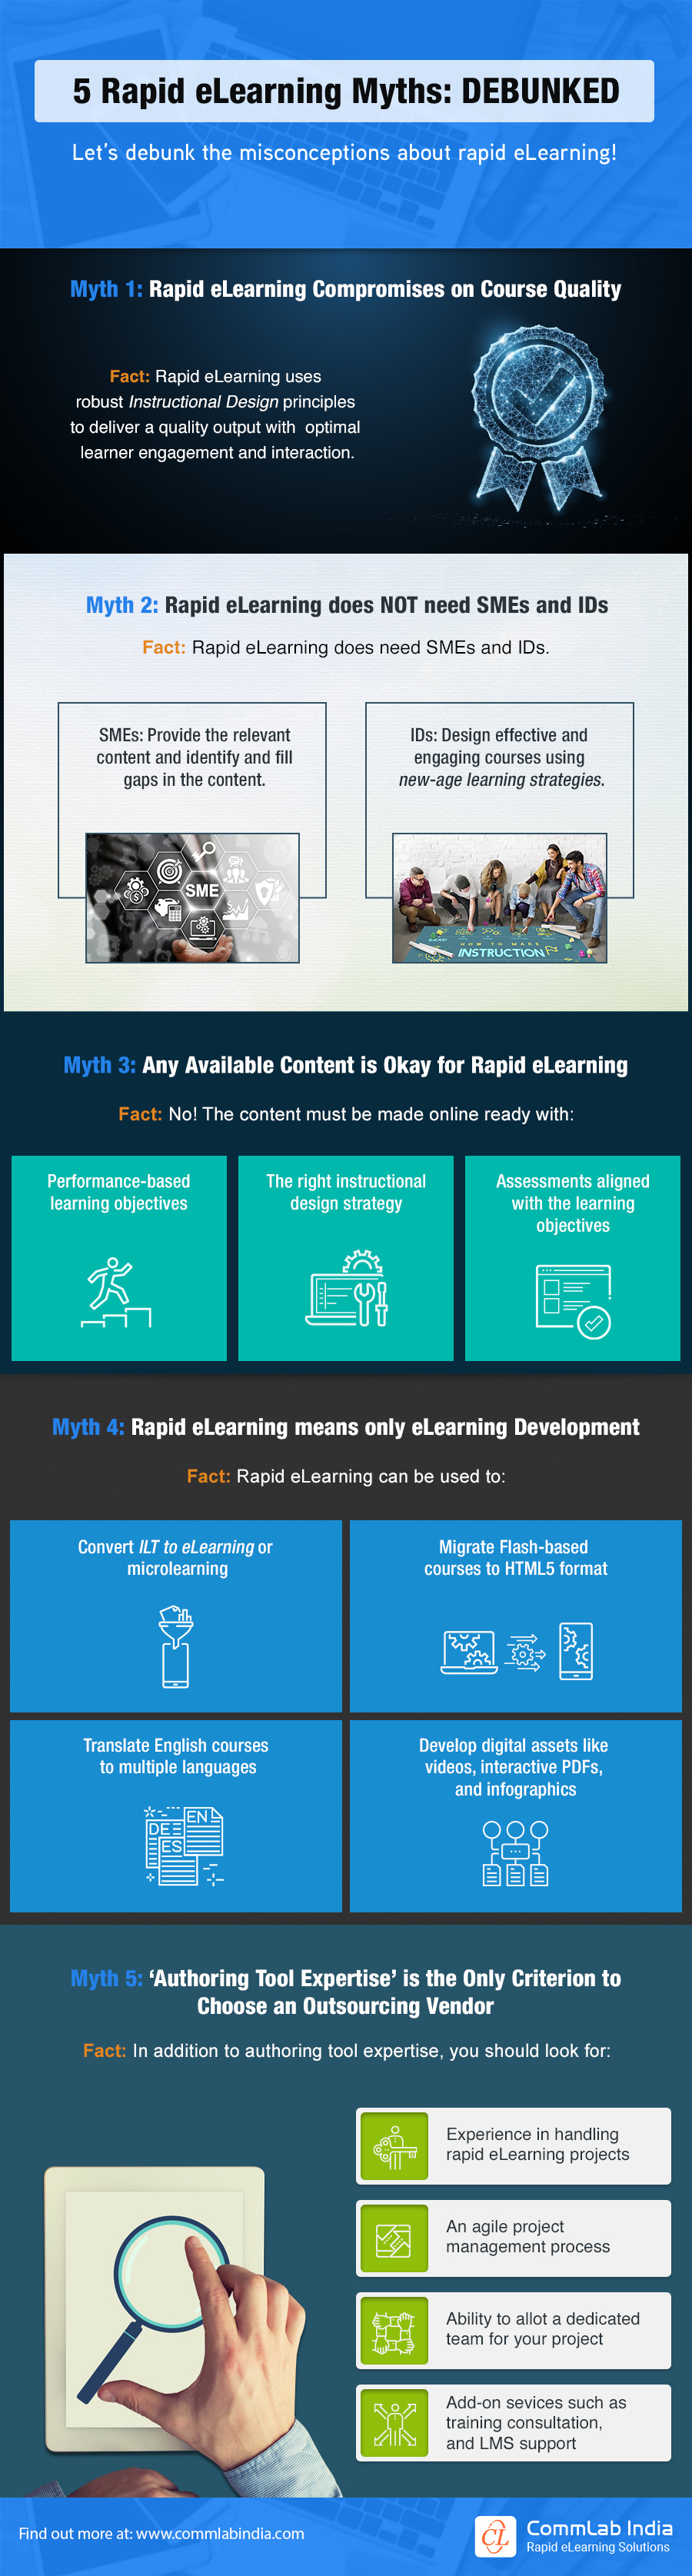 Rapid eLearning: Face-off Between the Myths and Facts